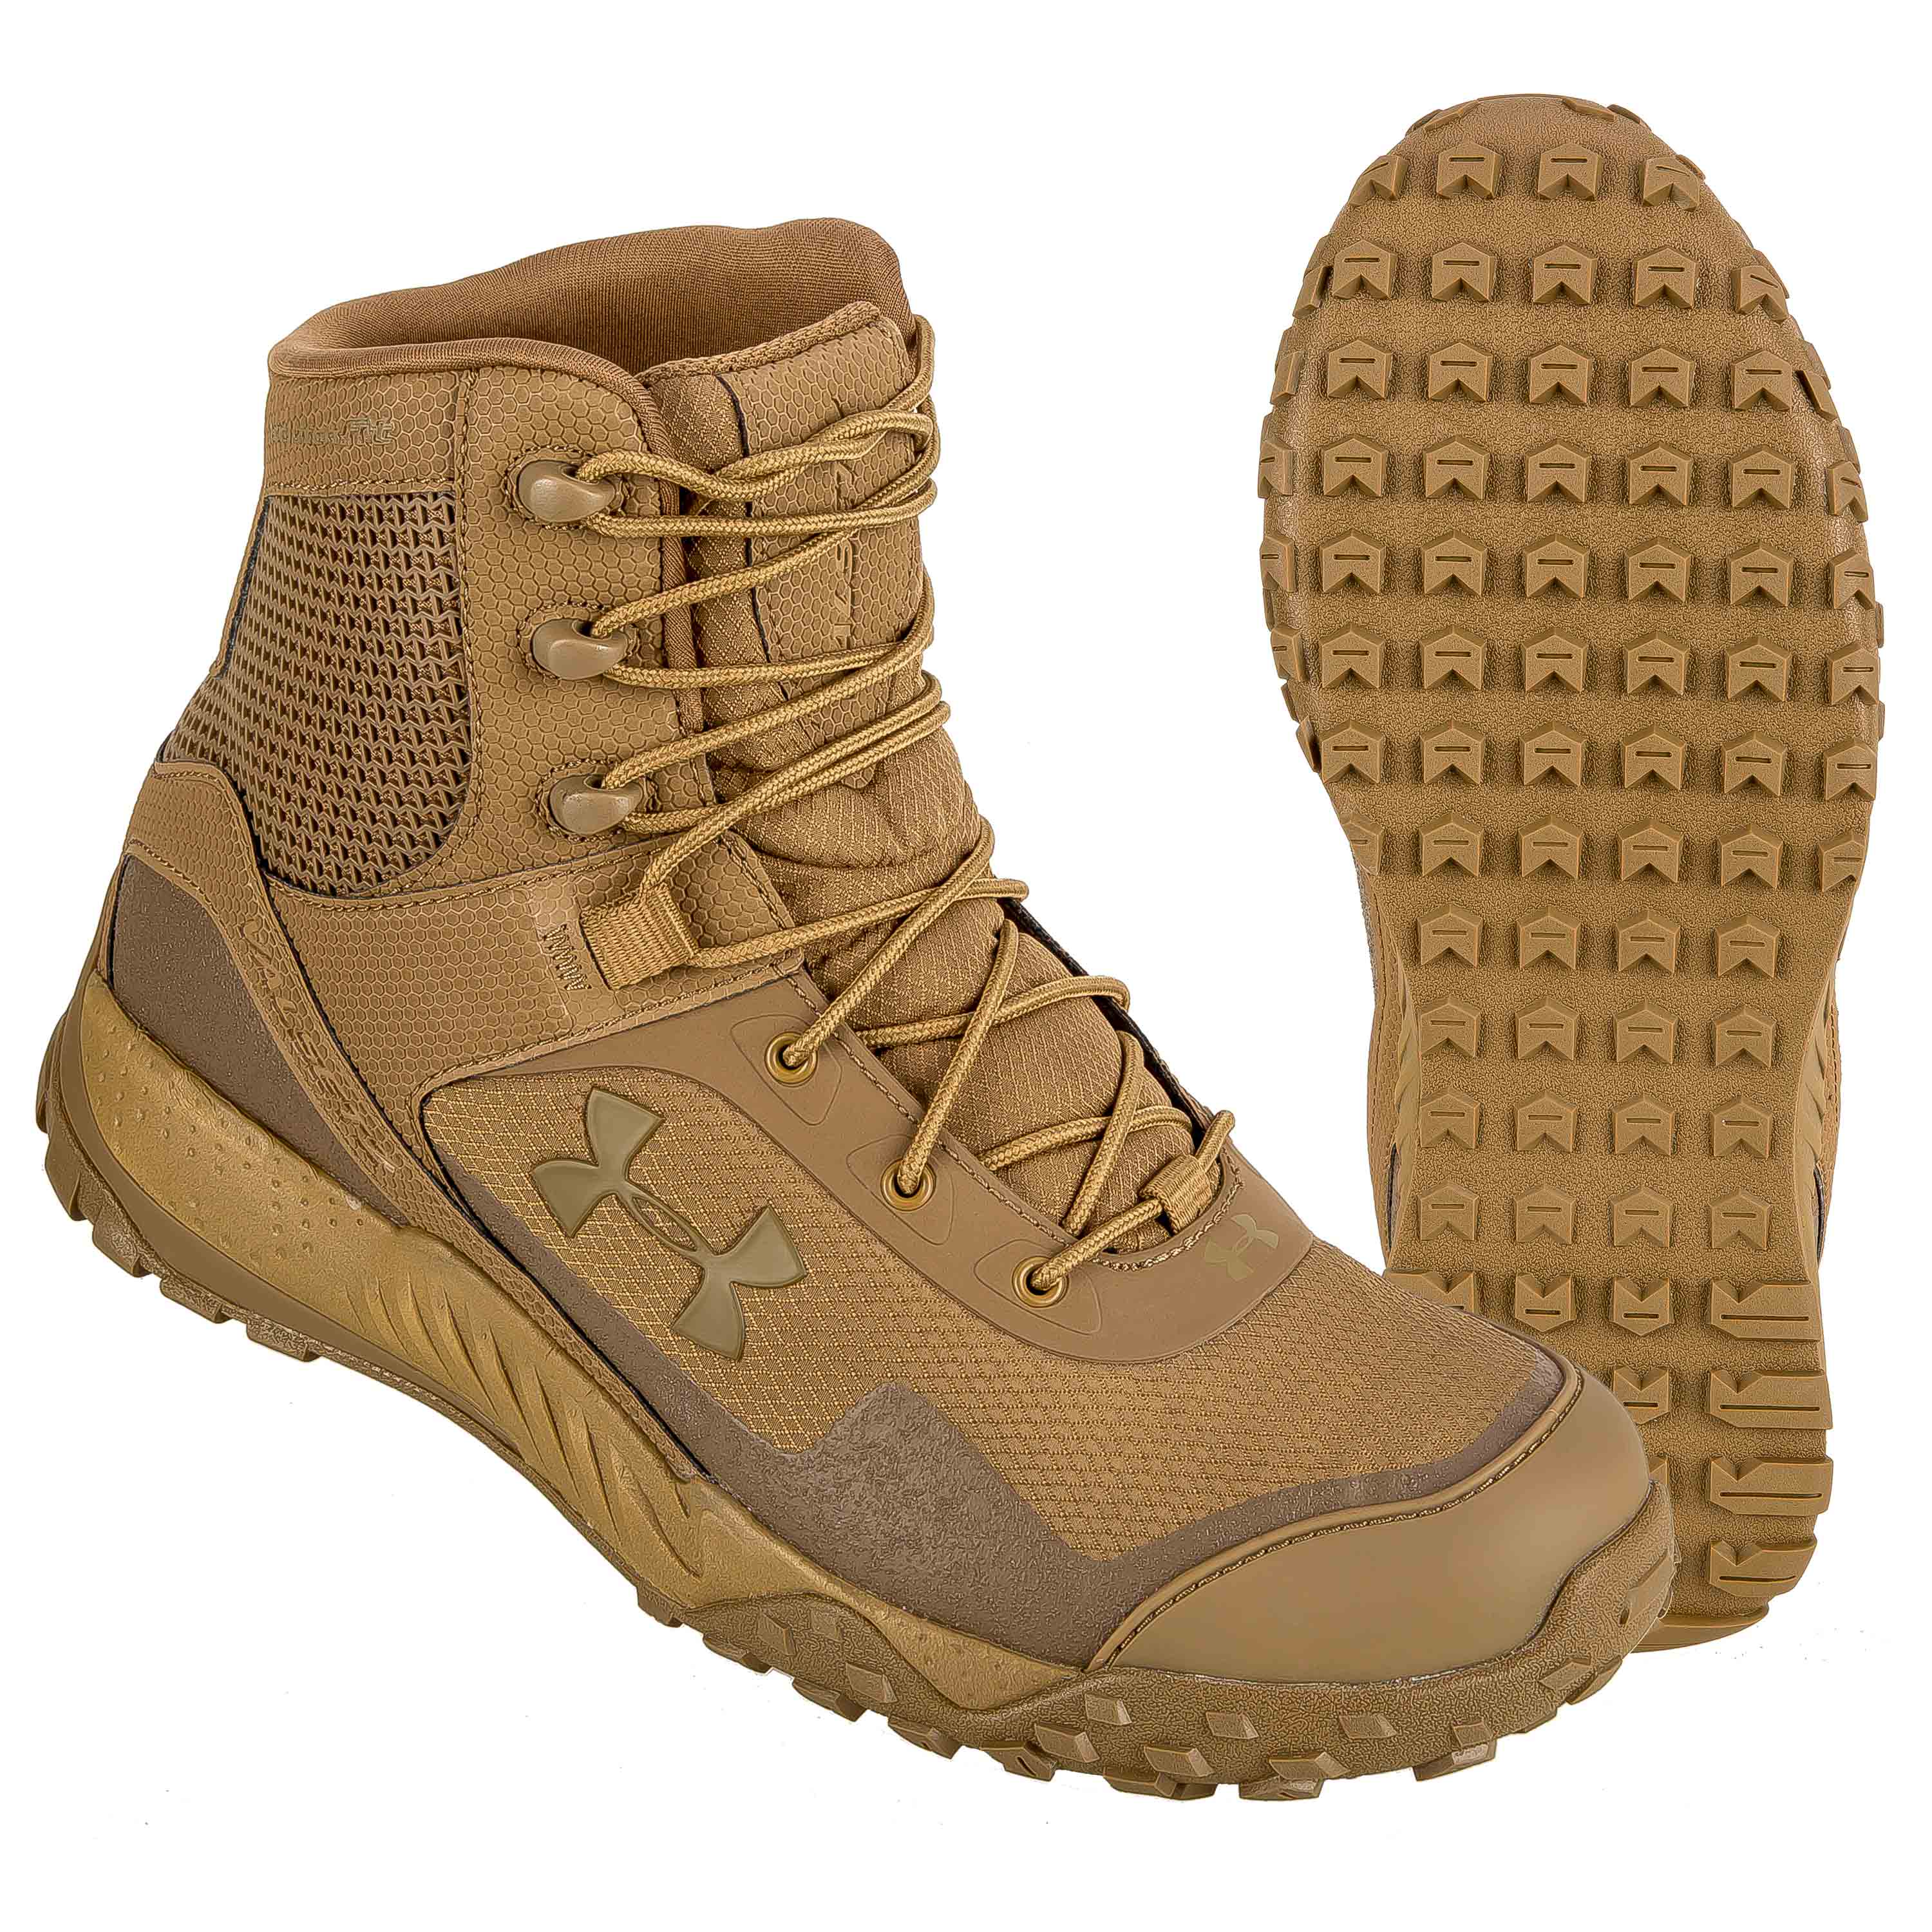 Purchase the Under Armour Tactical Boots Valsetz RTS 1.5 coyote